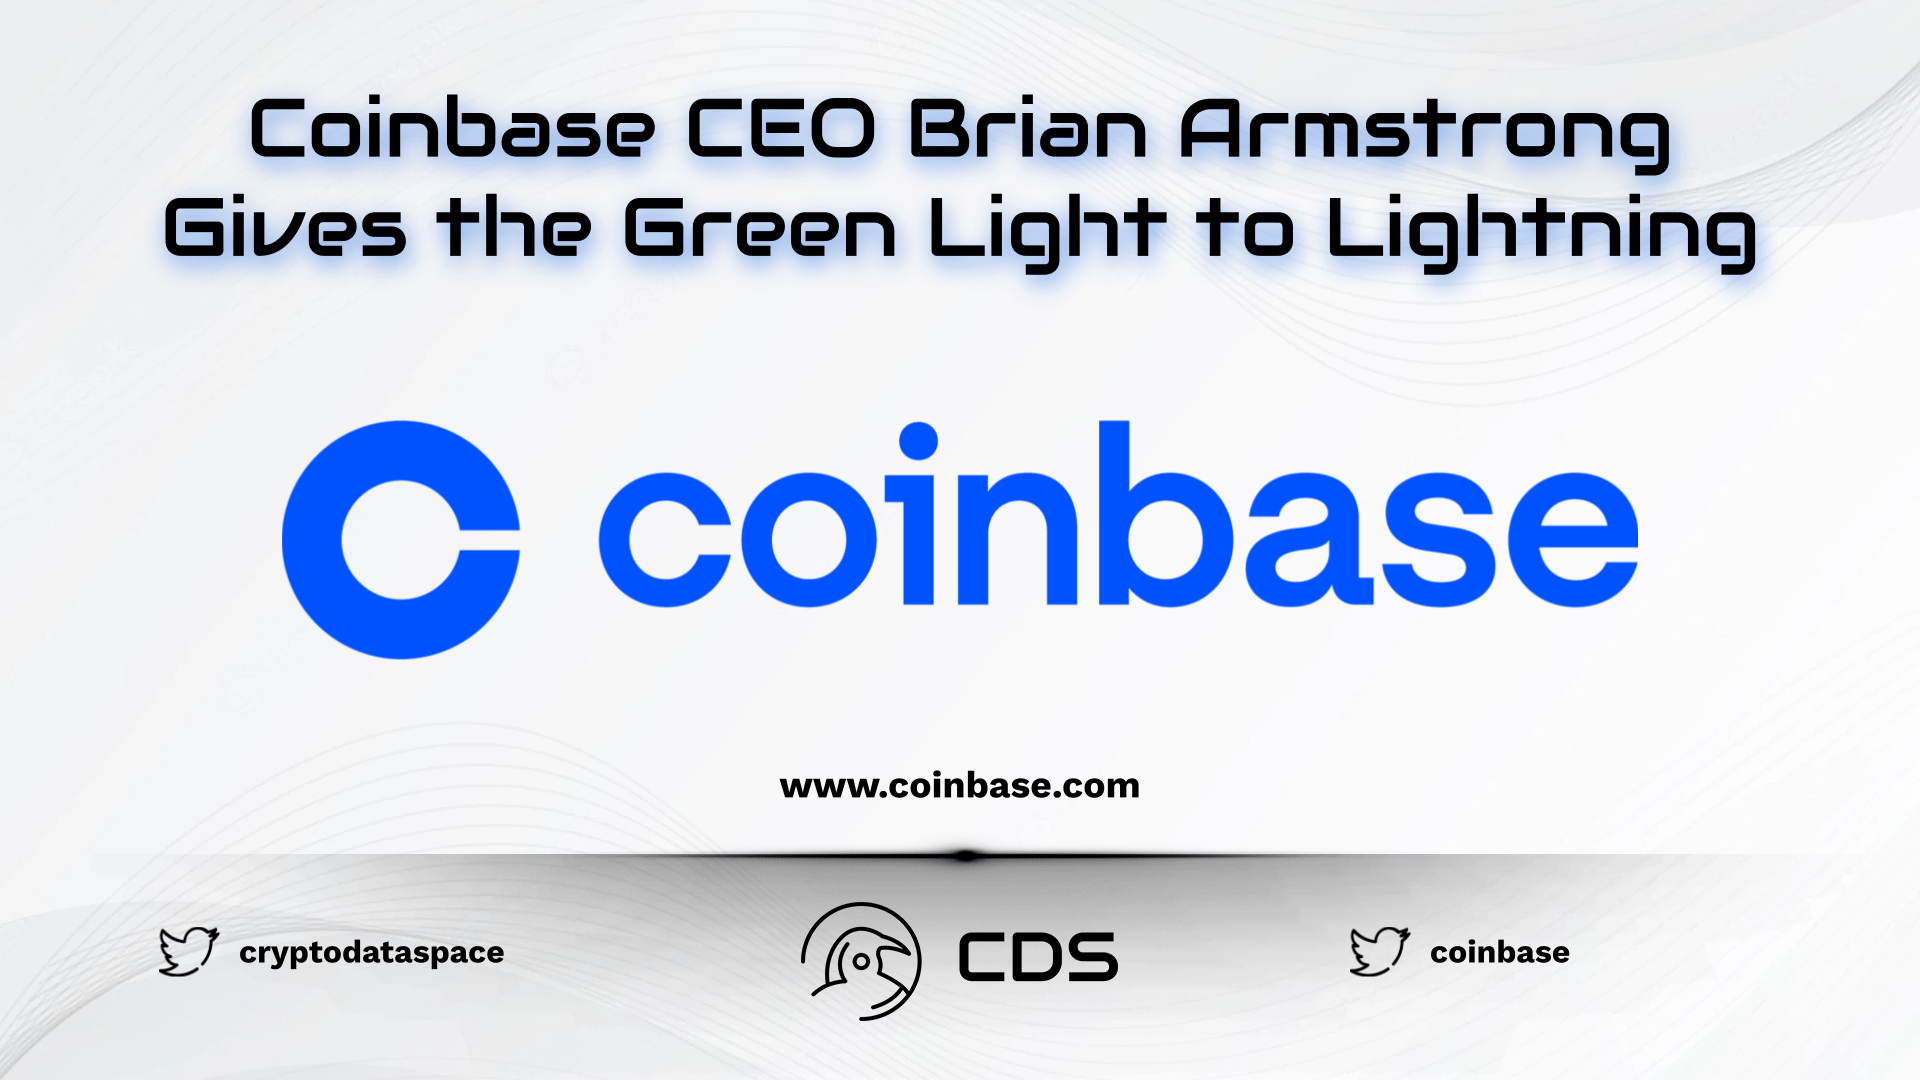 Coinbase CEO Brian Armstrong Gives the Green Light to Lightning